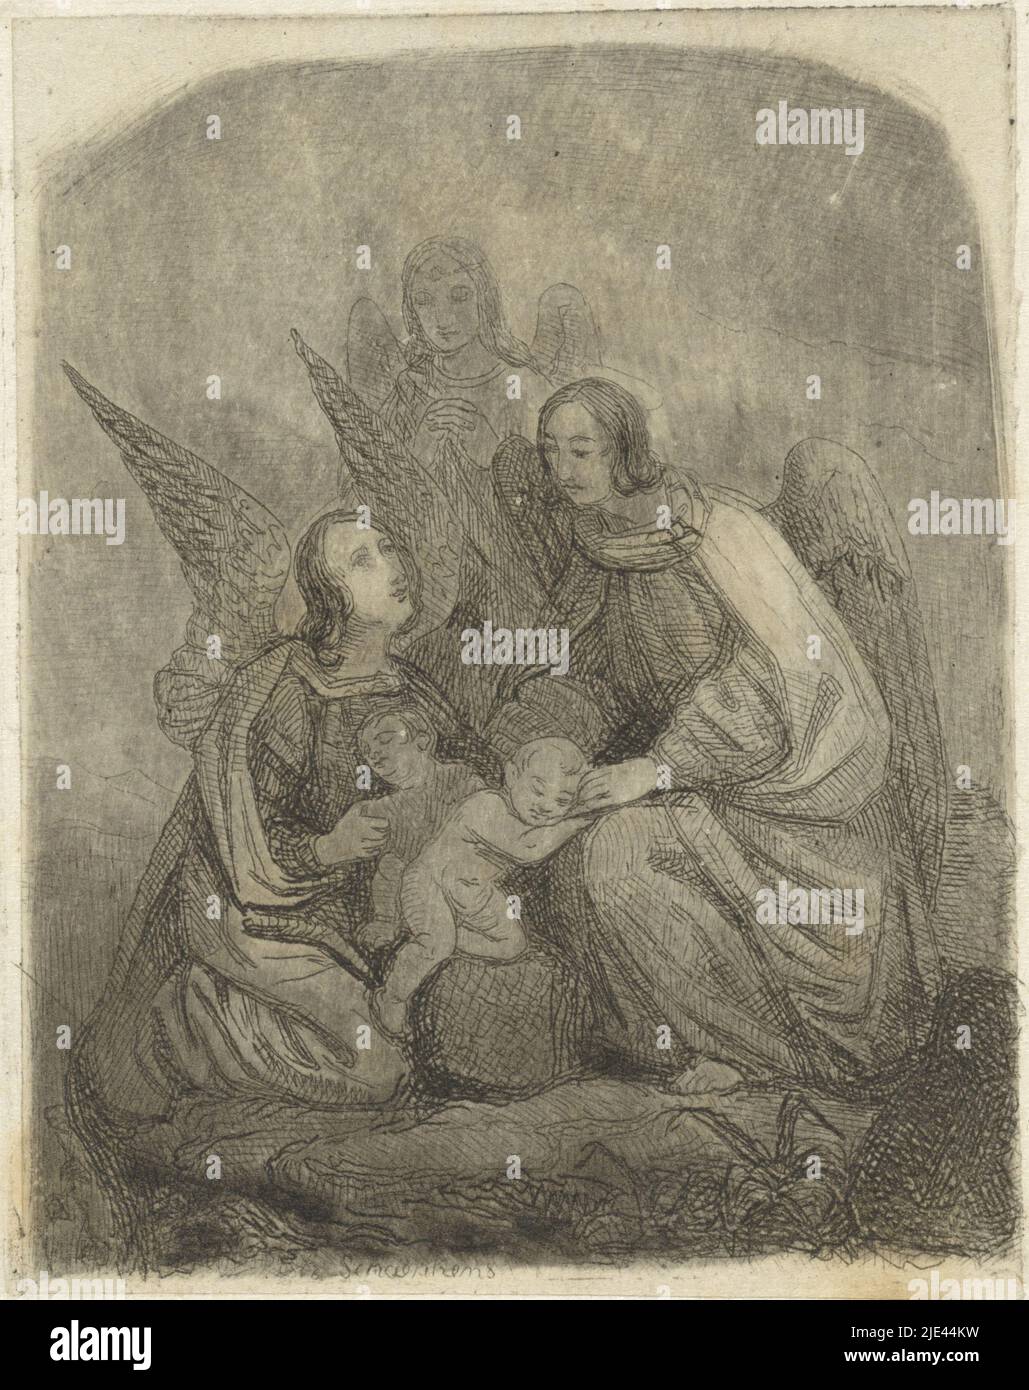 Guardian angels take care of two small children, Theodoor Schaepkens, 1825 - 1883, print maker: Theodoor Schaepkens, (mentioned on object), 1825 - 1883, paper, etching, h 99 mm × w 78 mm Stock Photo